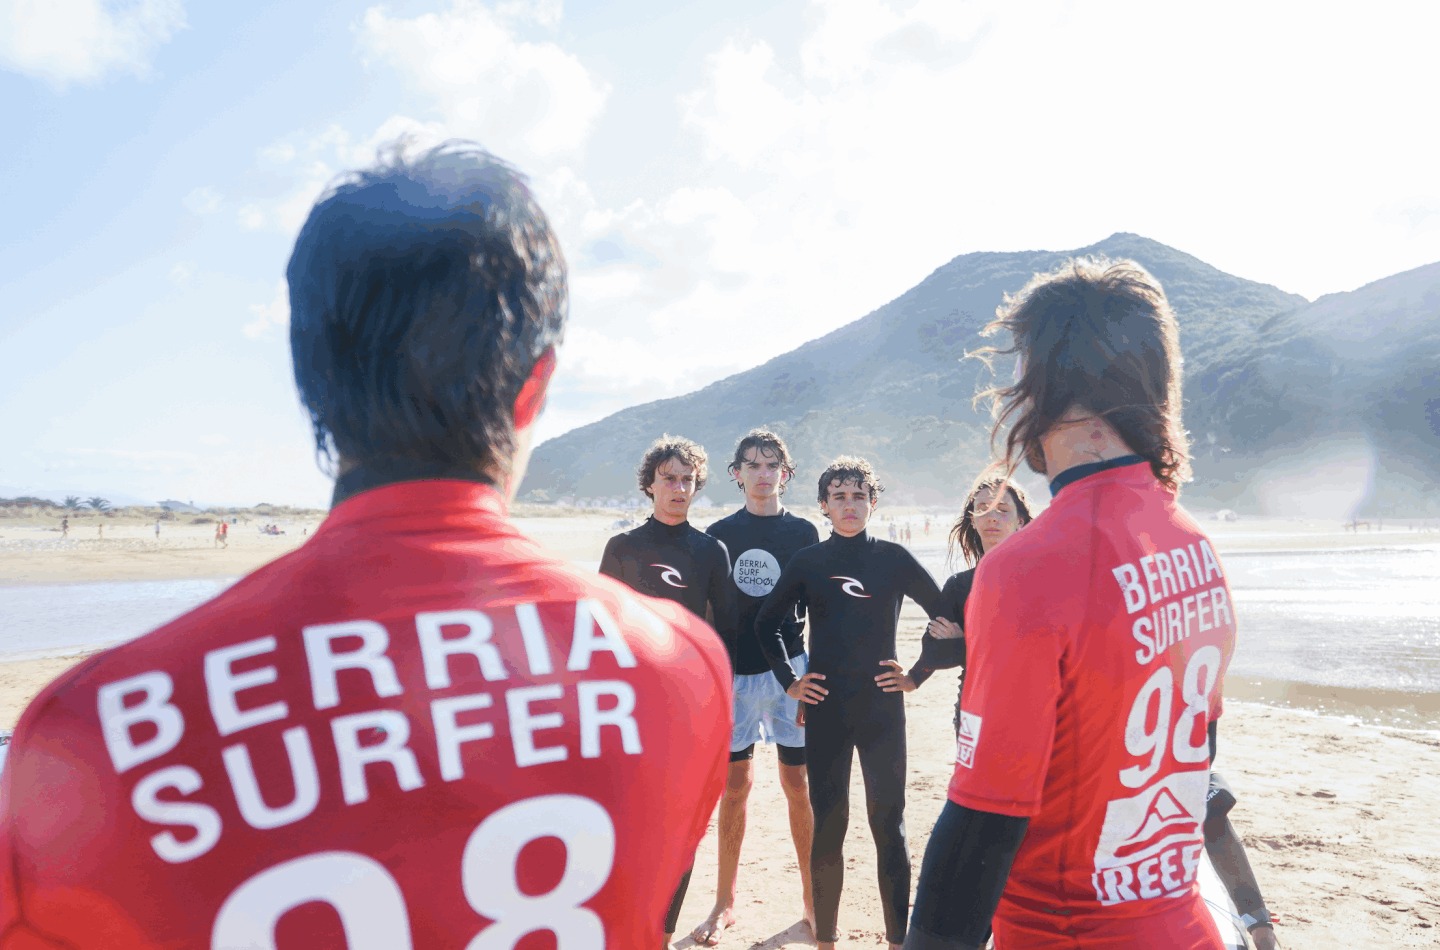 Surf Lessons with “Berria Surf School” in Berria, Cantabria 🏄🏝️🤙